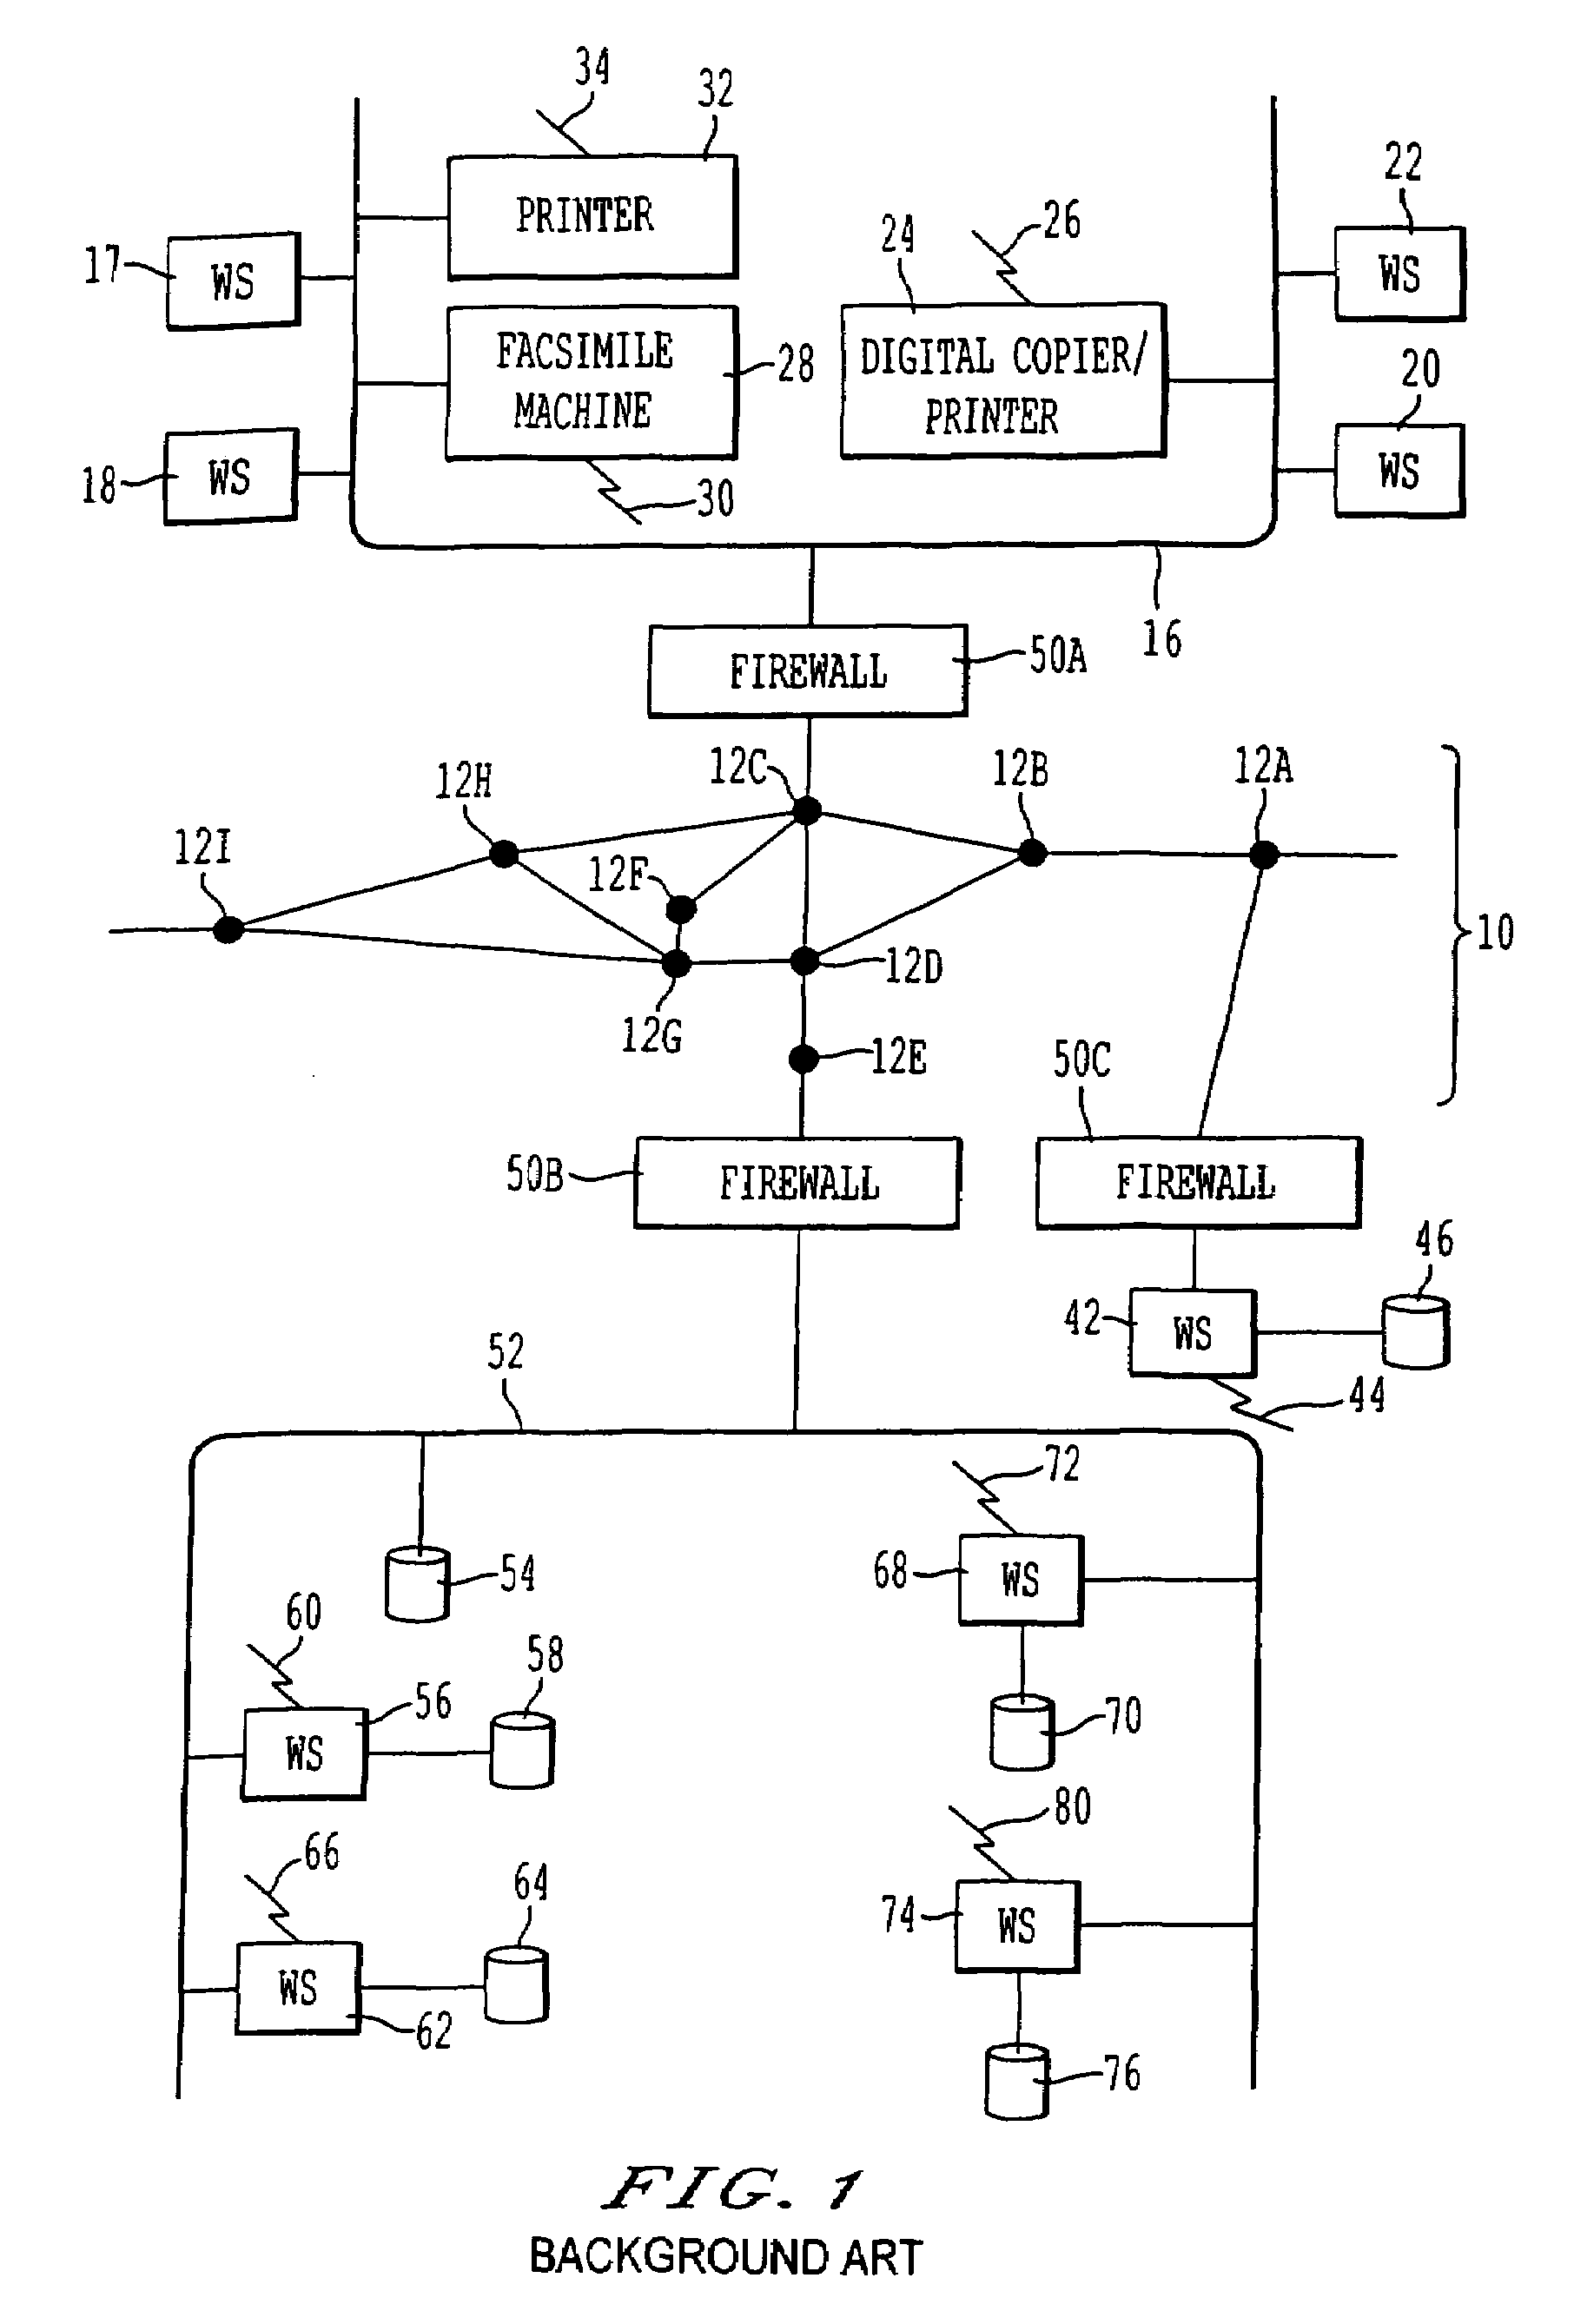 Method and system of remote diagnostic, control and information collection using a dynamic linked library of multiple formats and multiple protocols